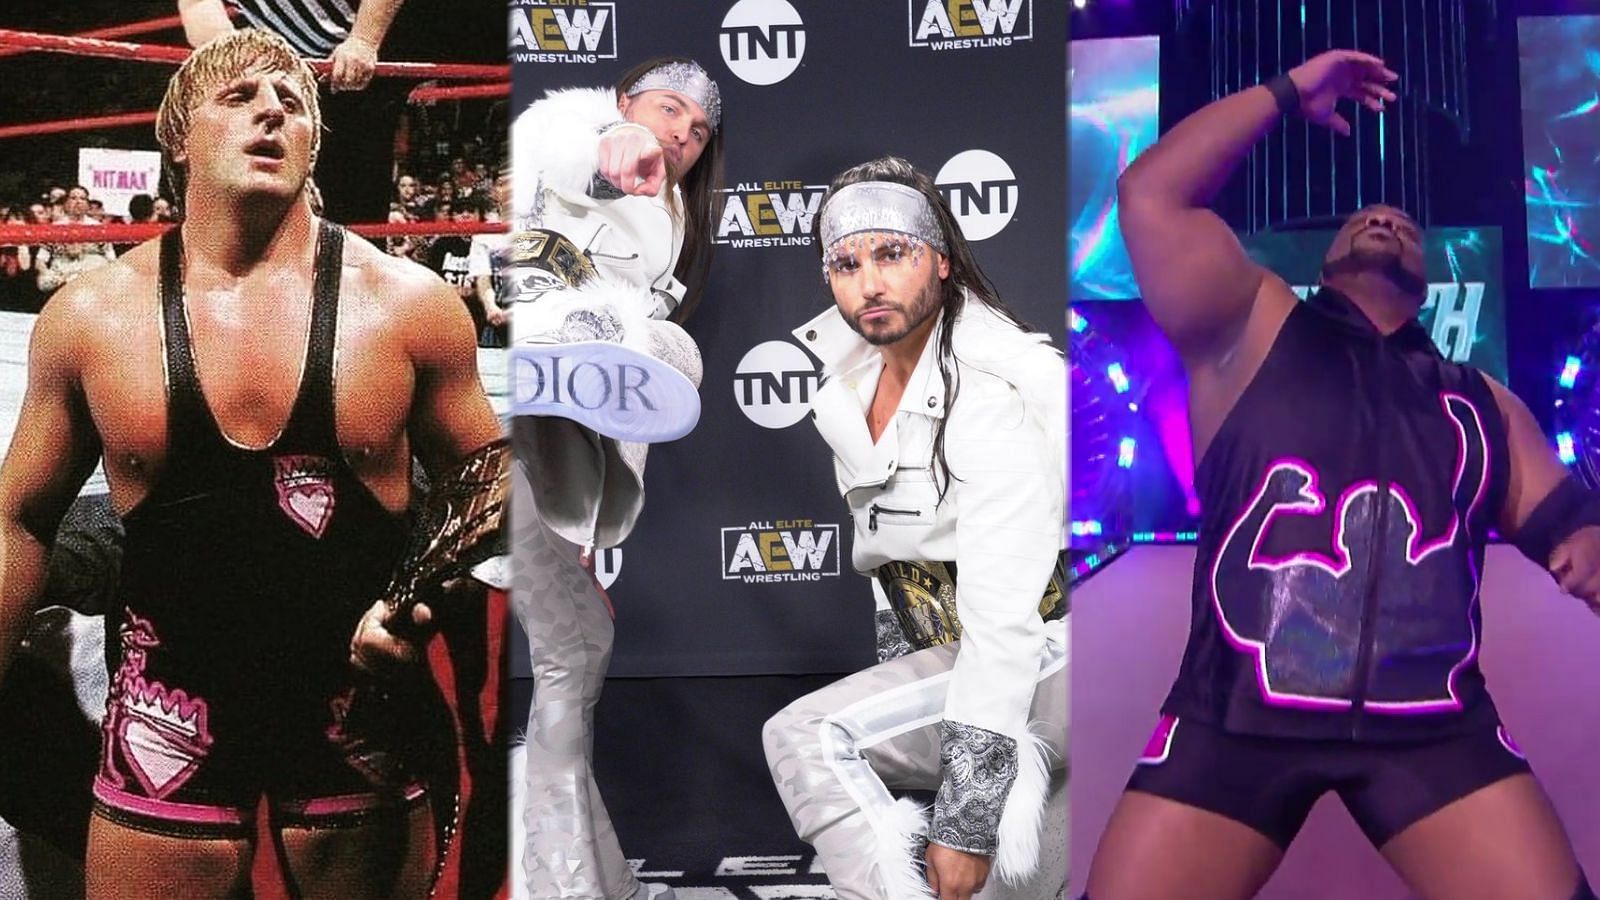 AEW Rampage is set to feature some big names this week.